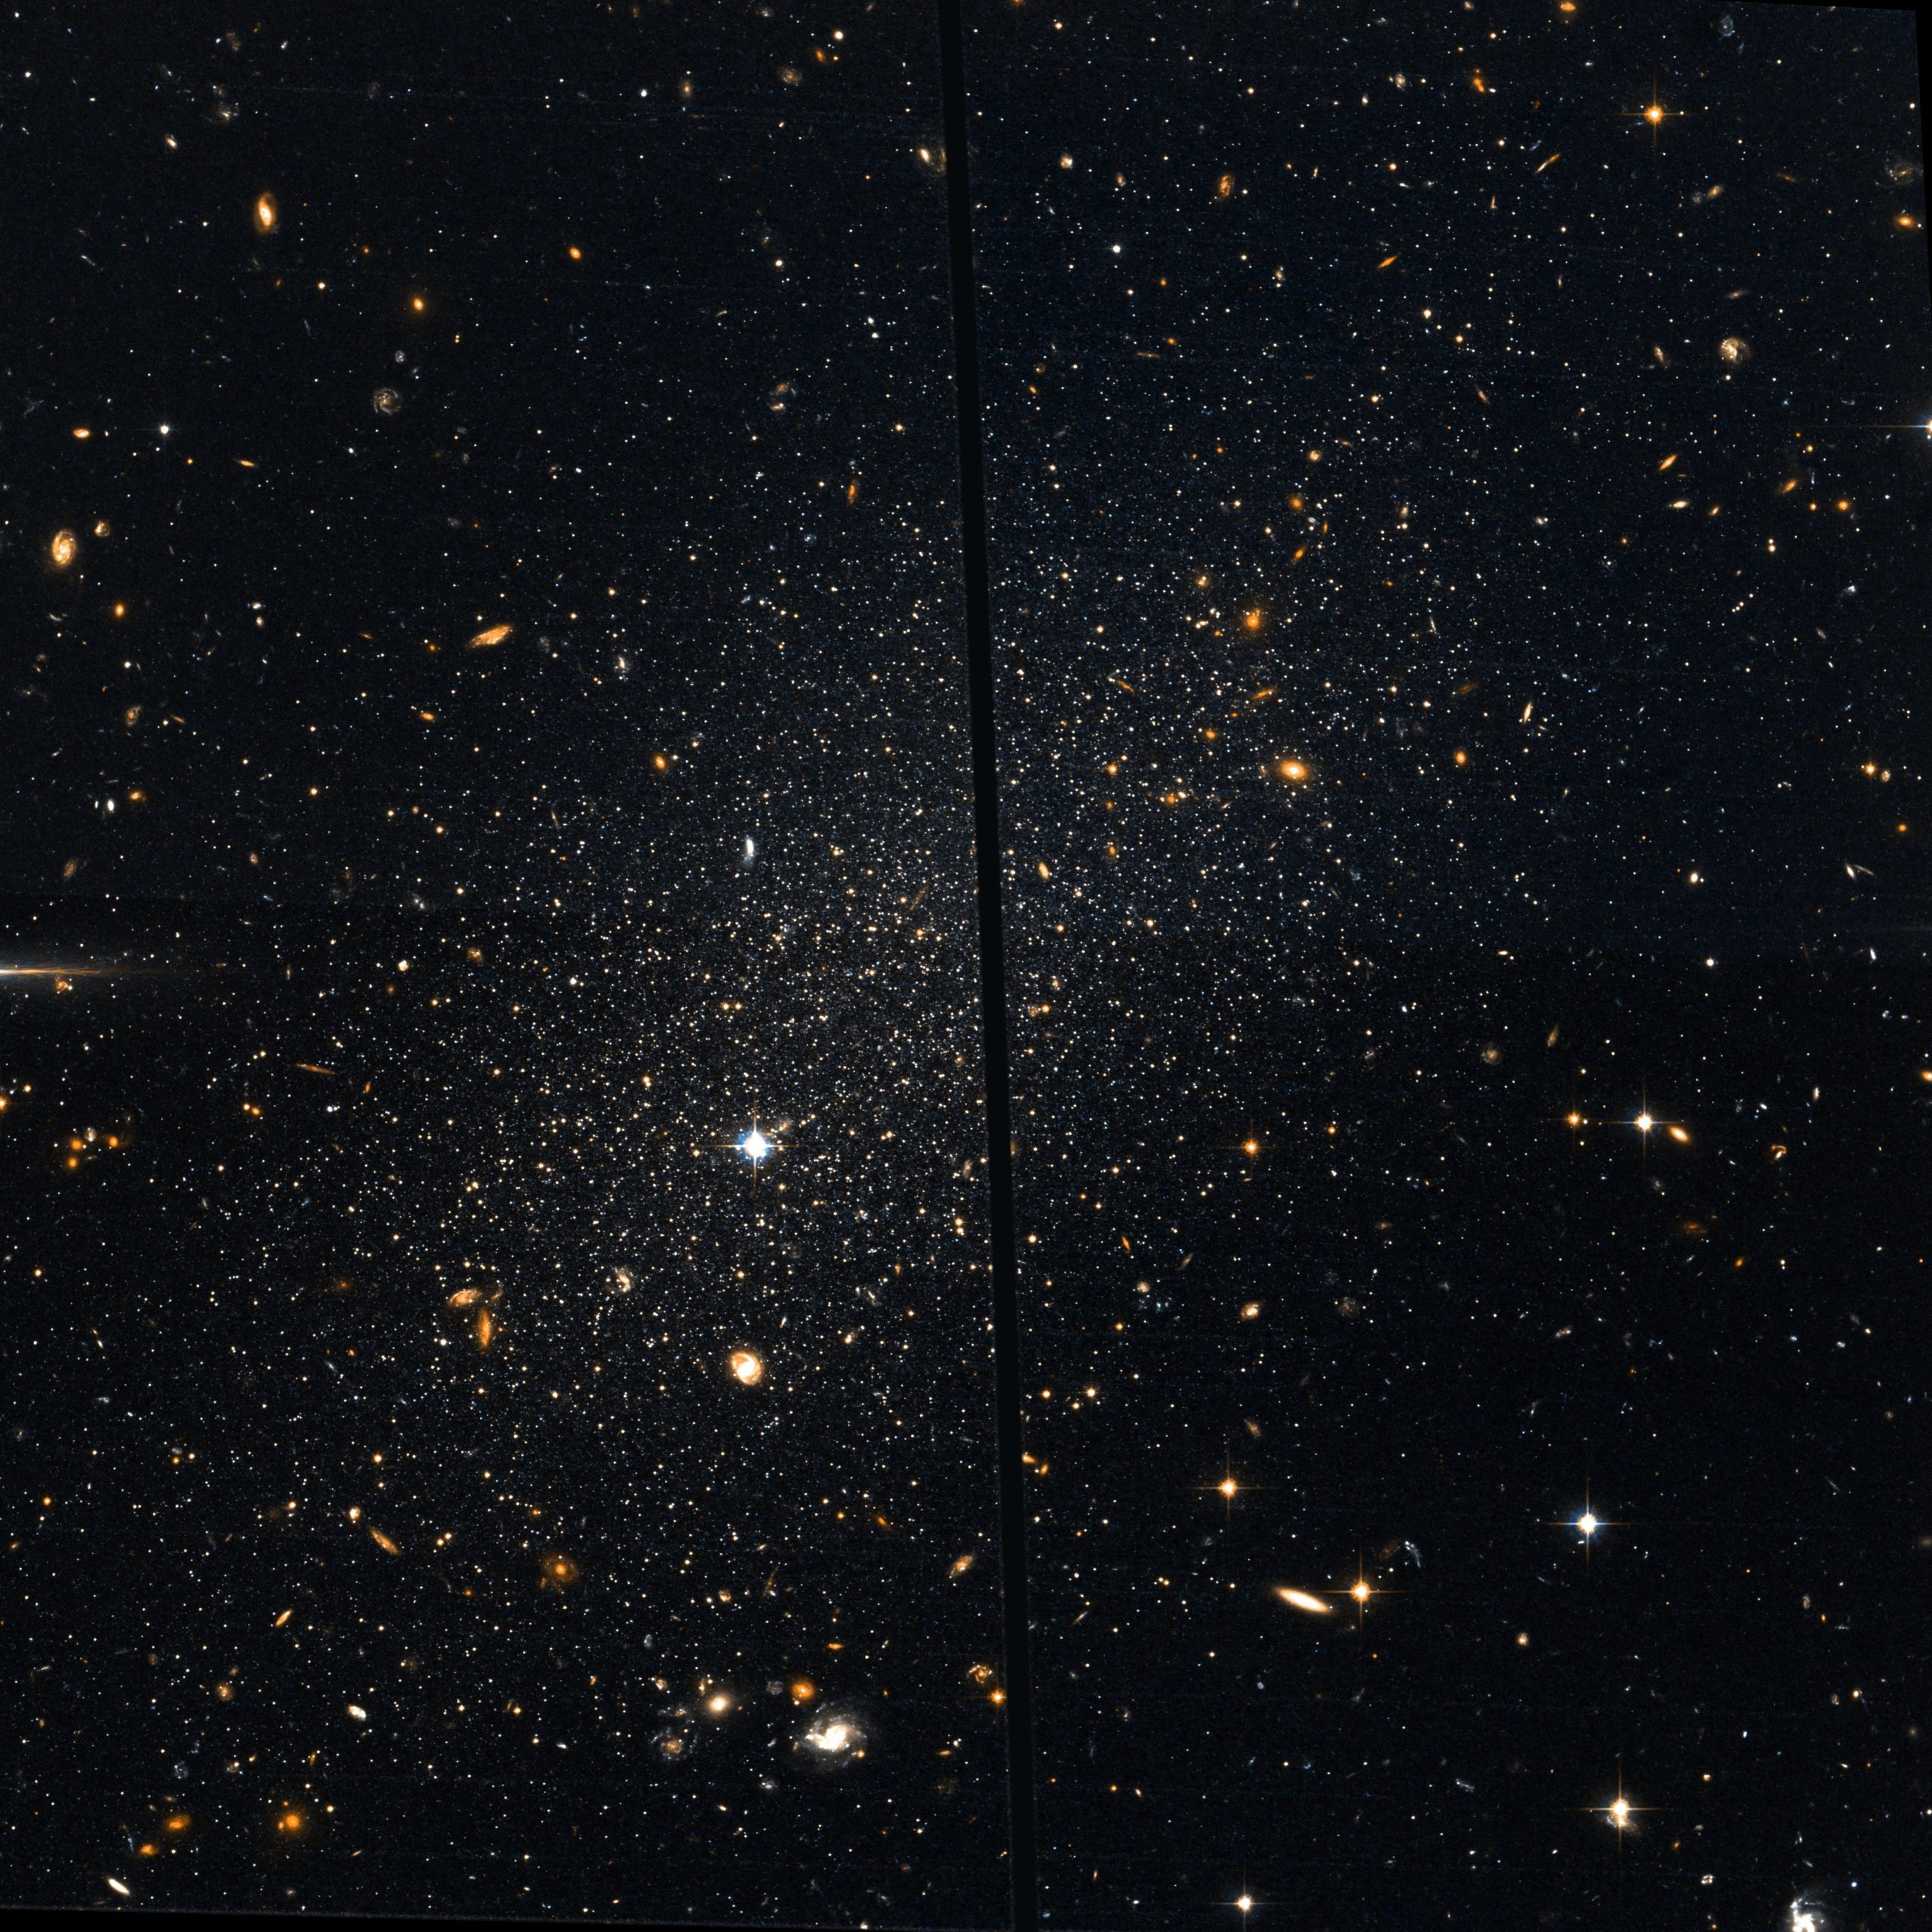 The Tucana dwarf galaxy, imaged by the Hubble Space Telescope. (Image: Hubble, Fair Use)